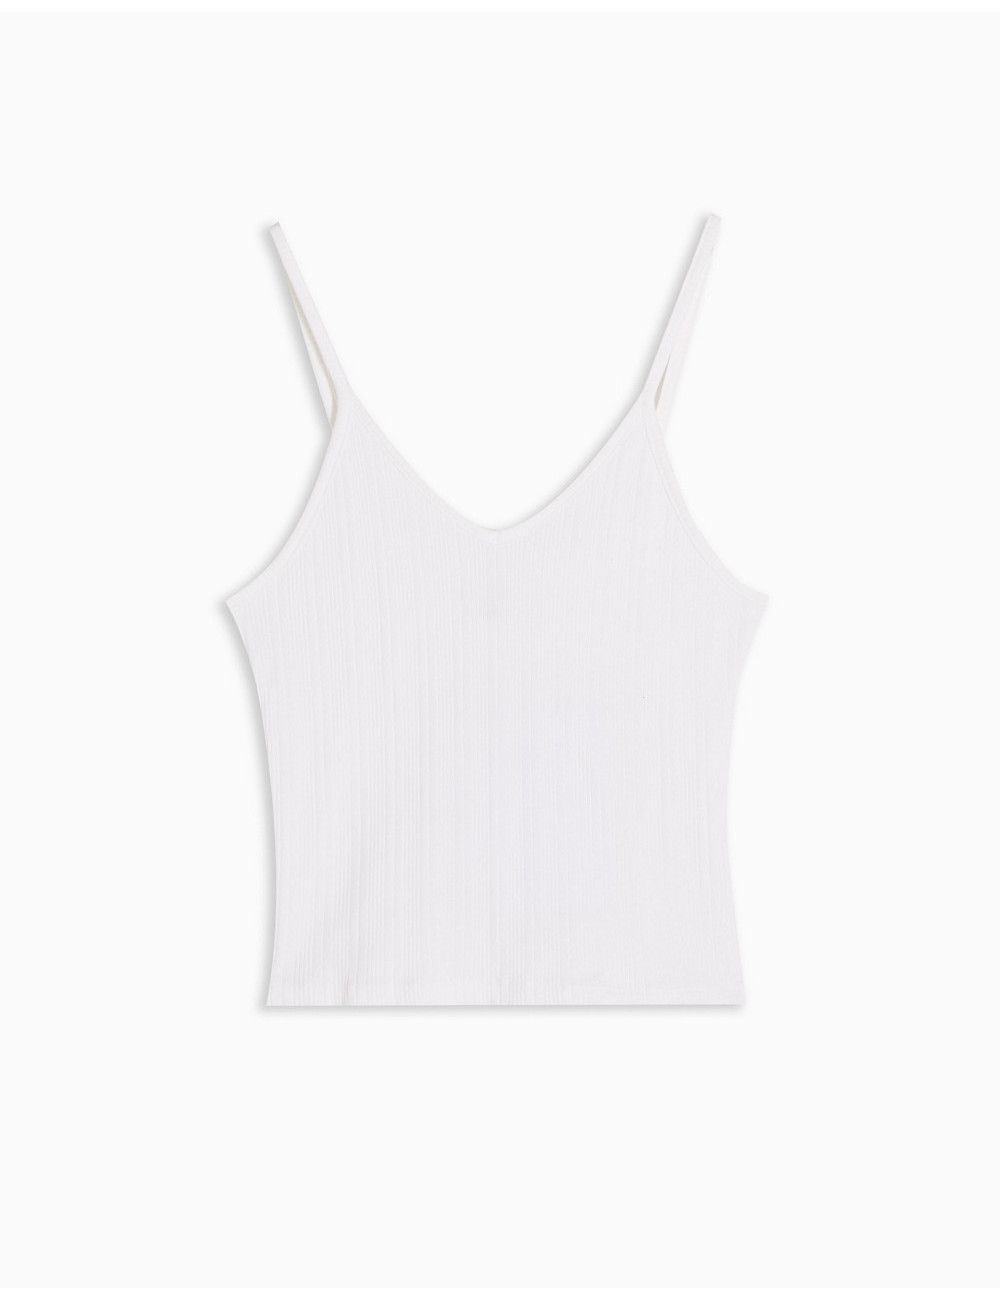 Topshop ribbed cami in white